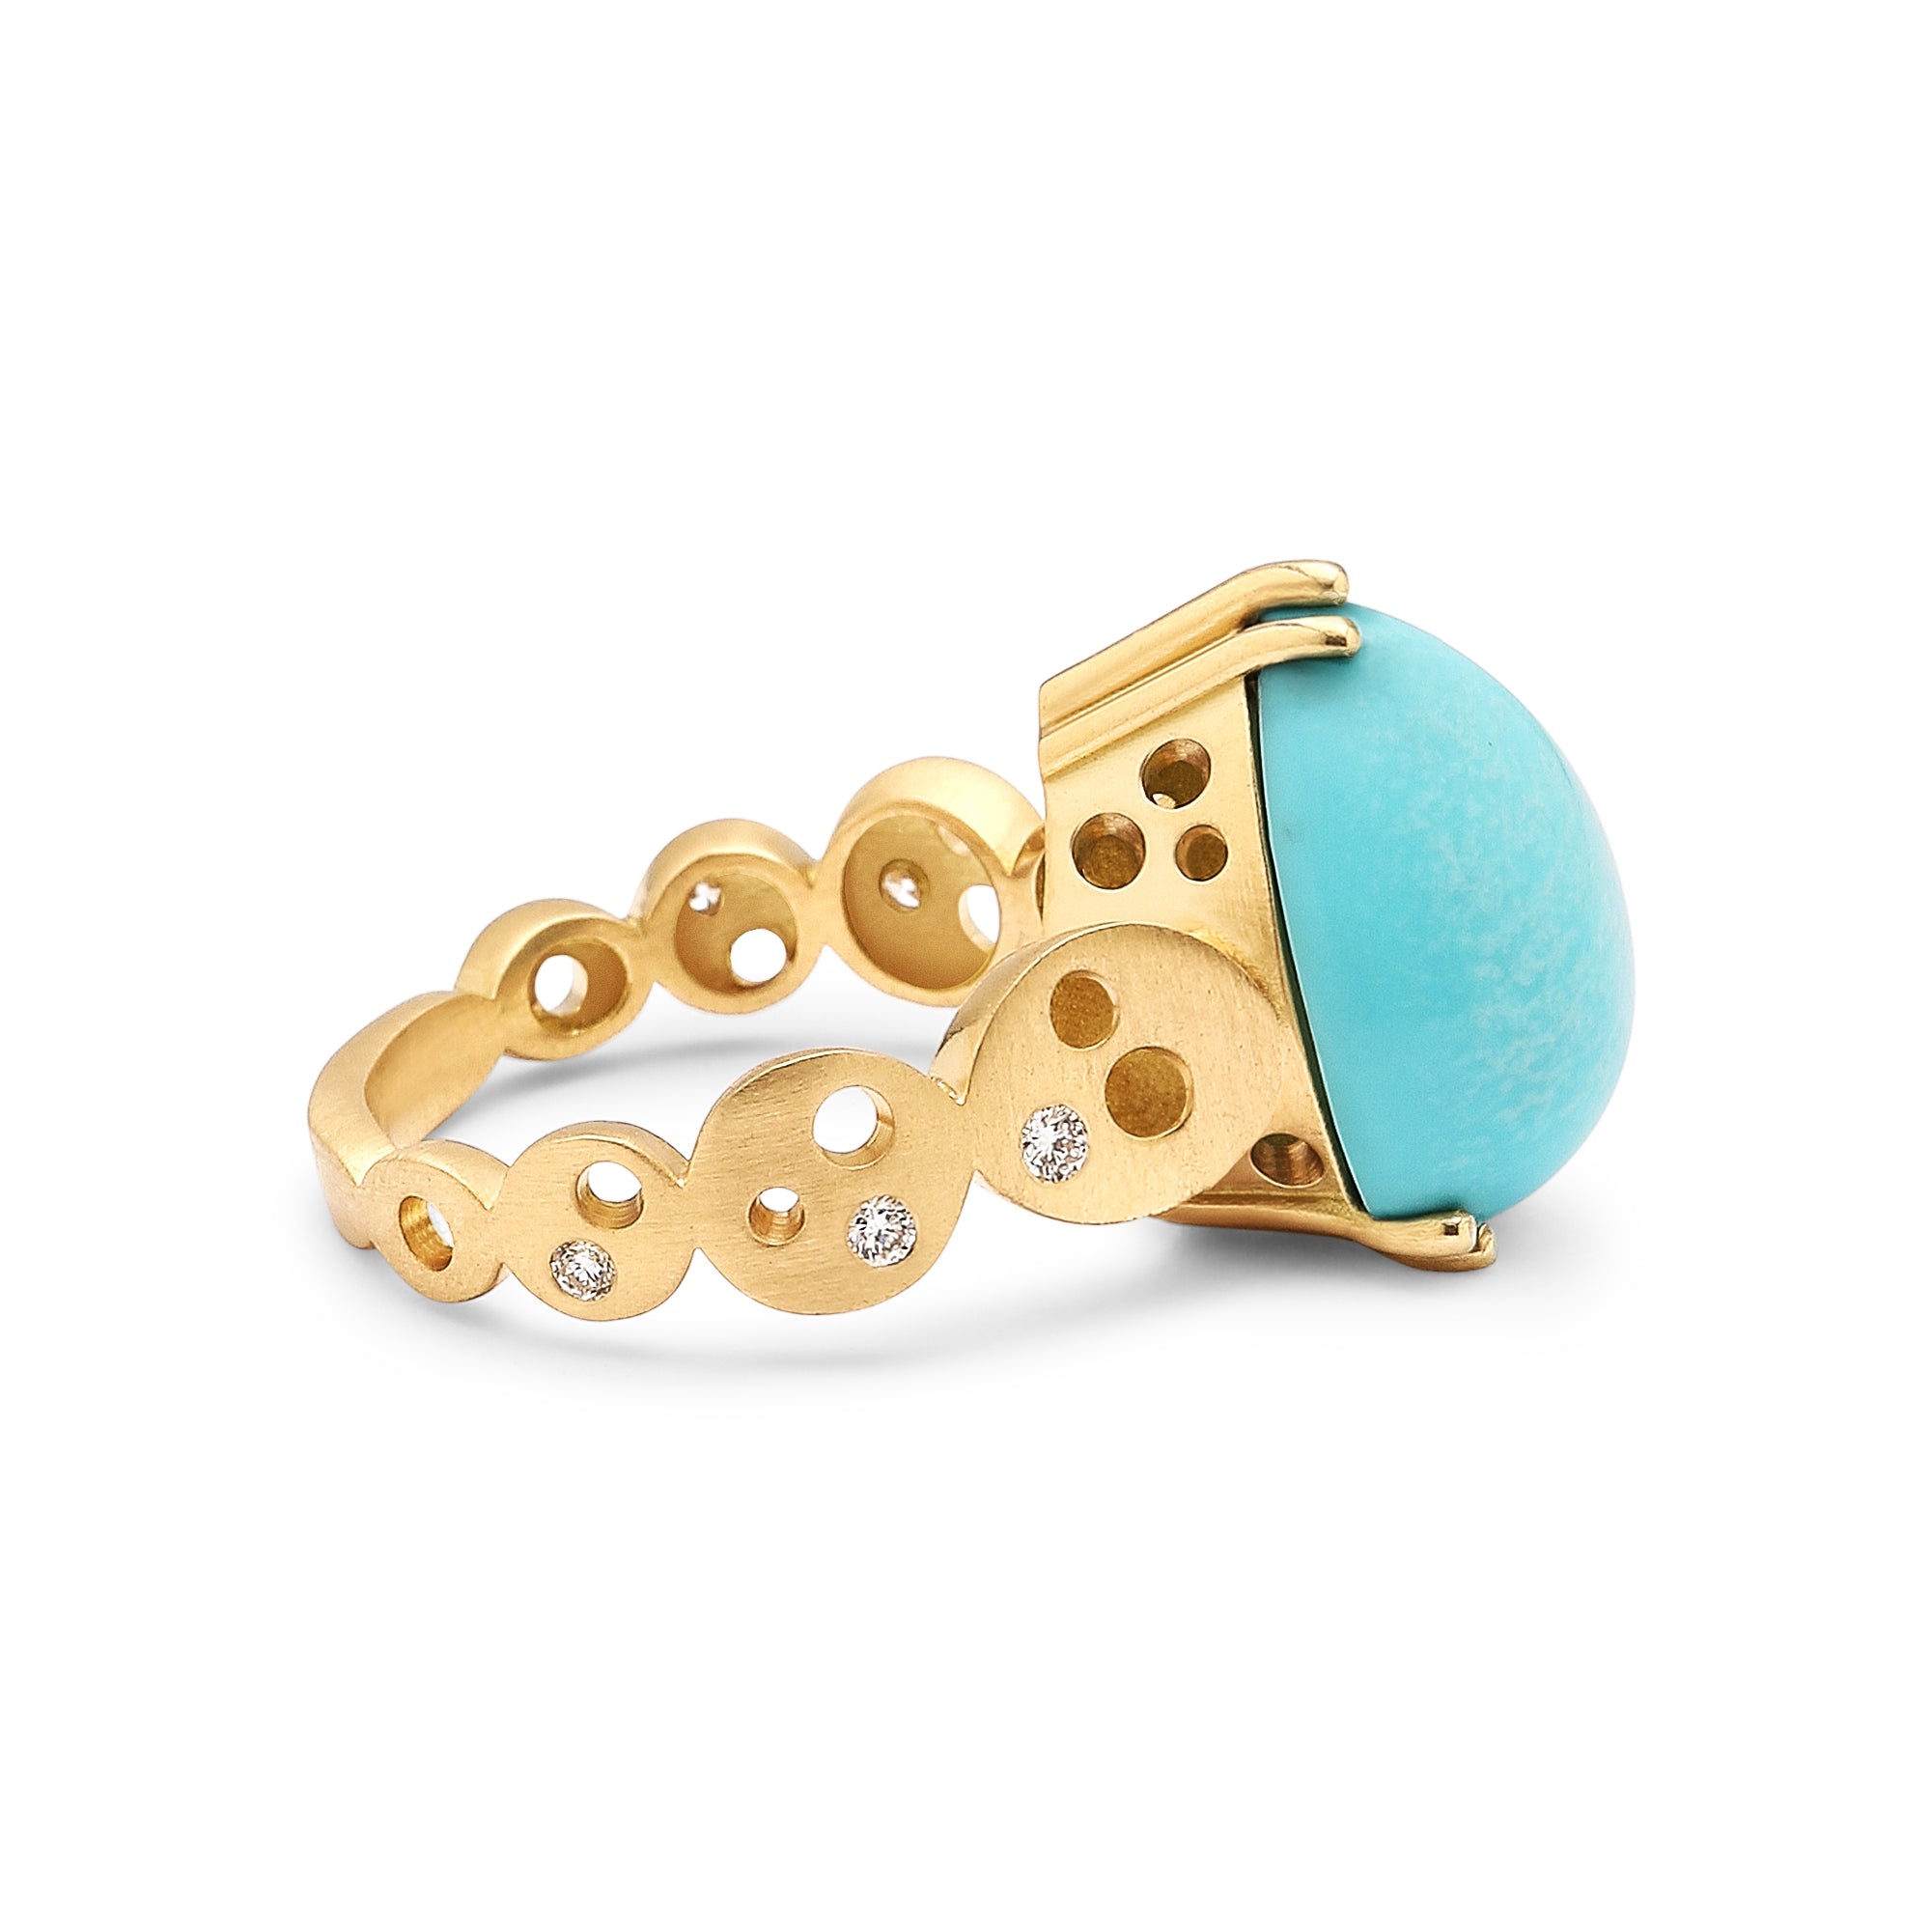 Pear-Shaped Sleeping Beauty Turquoise & Coin Band Ring